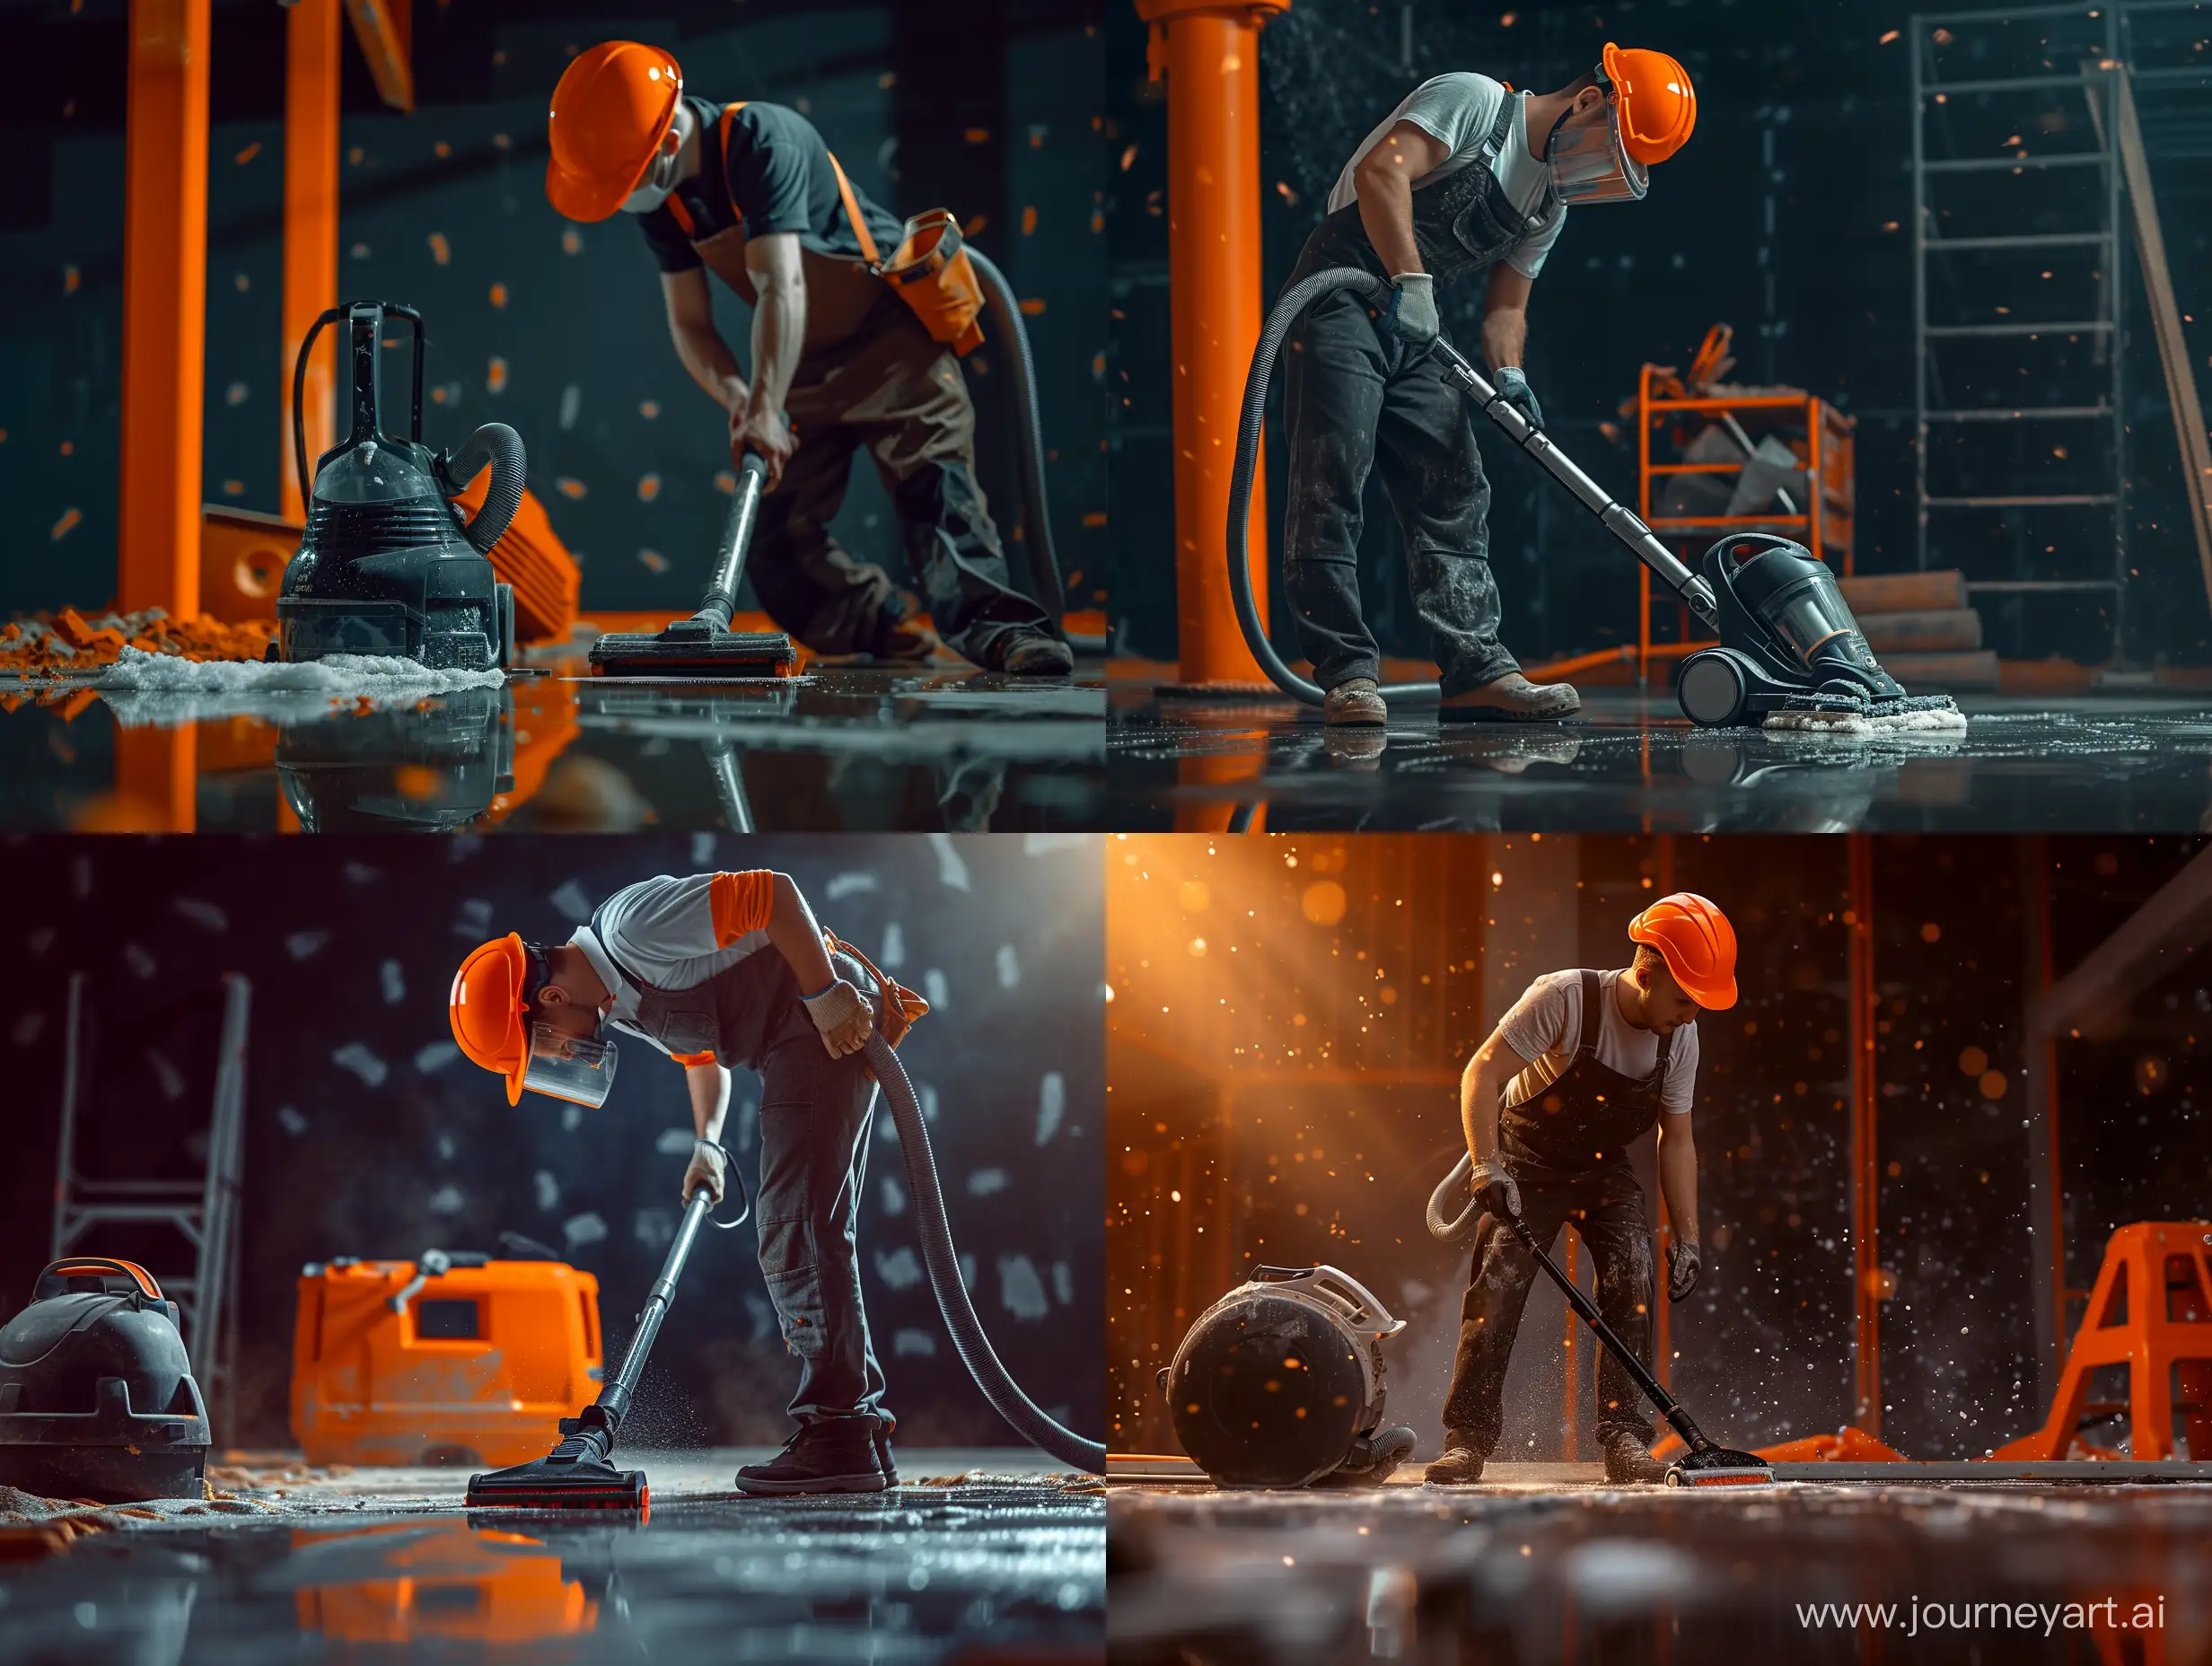 Construction-Room-Cleaning-with-Precision-Man-in-Overalls-and-Orange-Helmet-Using-Advanced-Vacuum-Cleaner